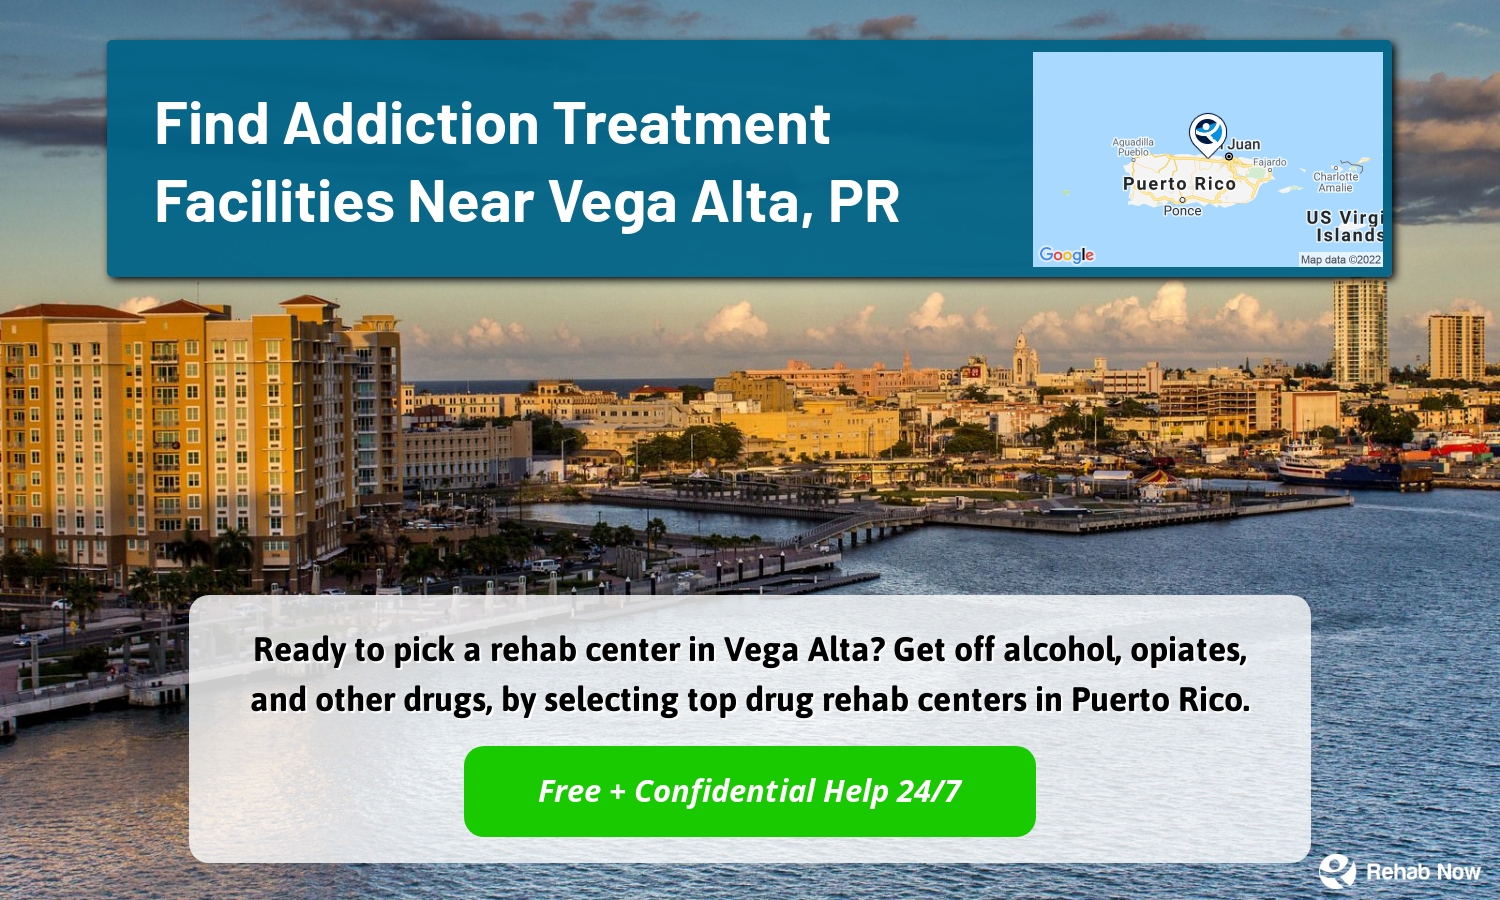 Ready to pick a rehab center in Vega Alta? Get off alcohol, opiates, and other drugs, by selecting top drug rehab centers in Puerto Rico.